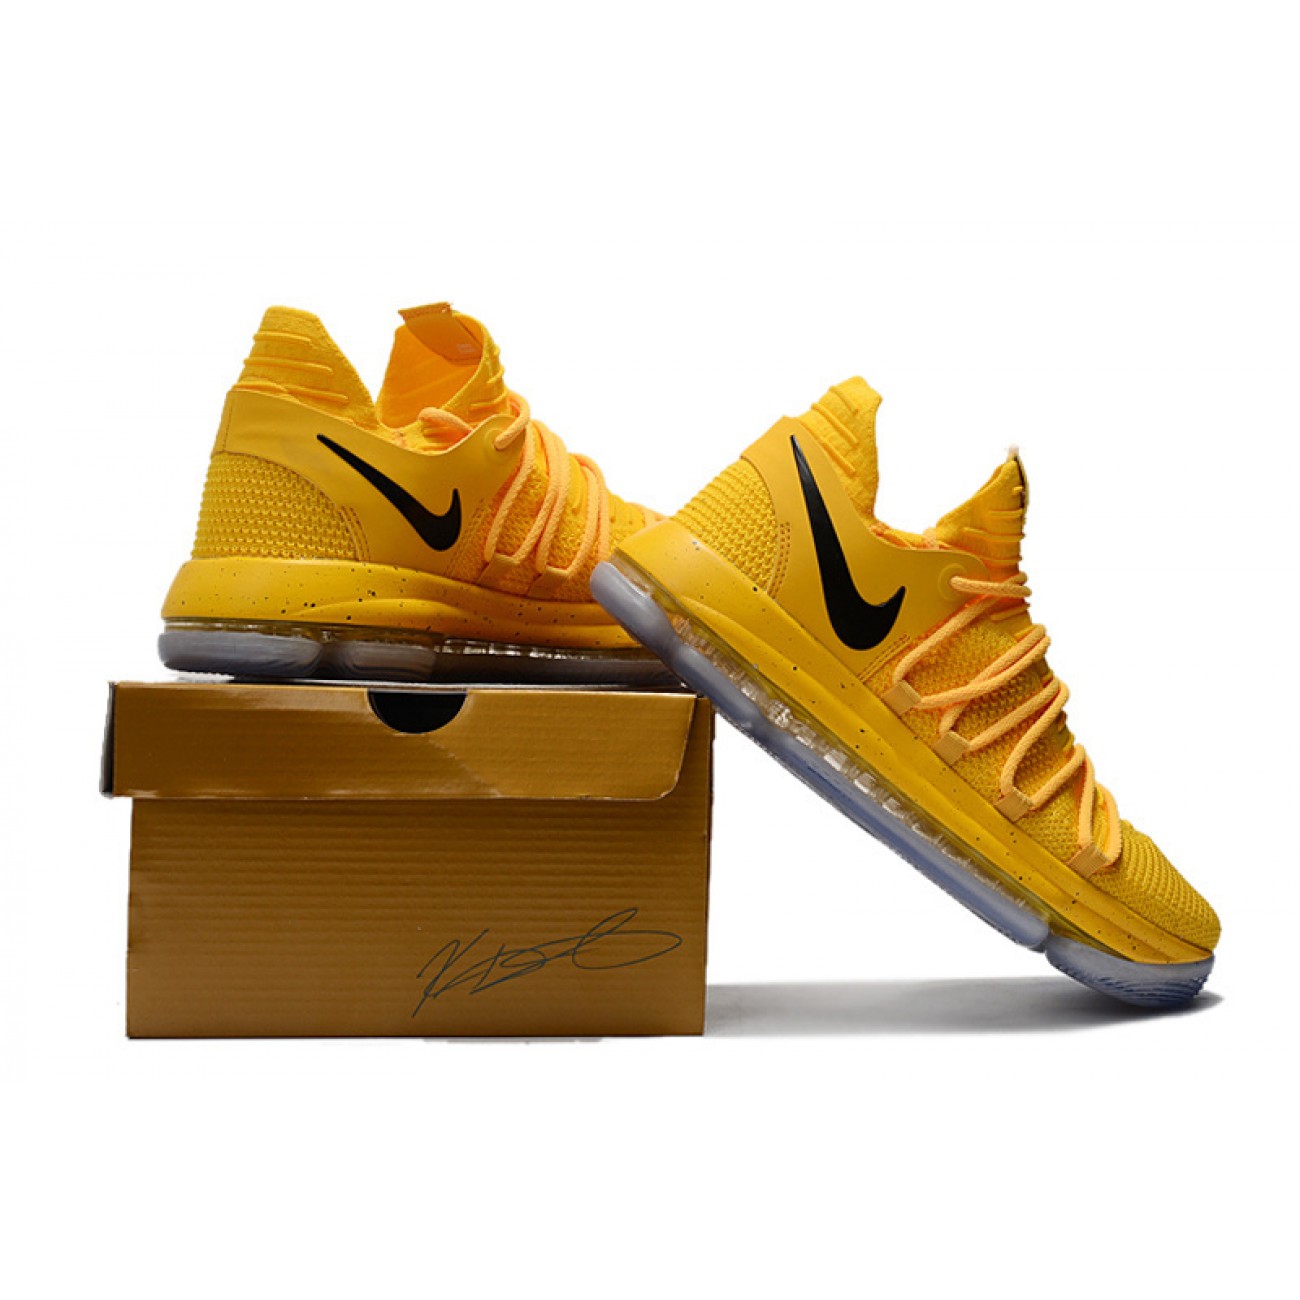 Kevin Durant KD10 Yellow/Black